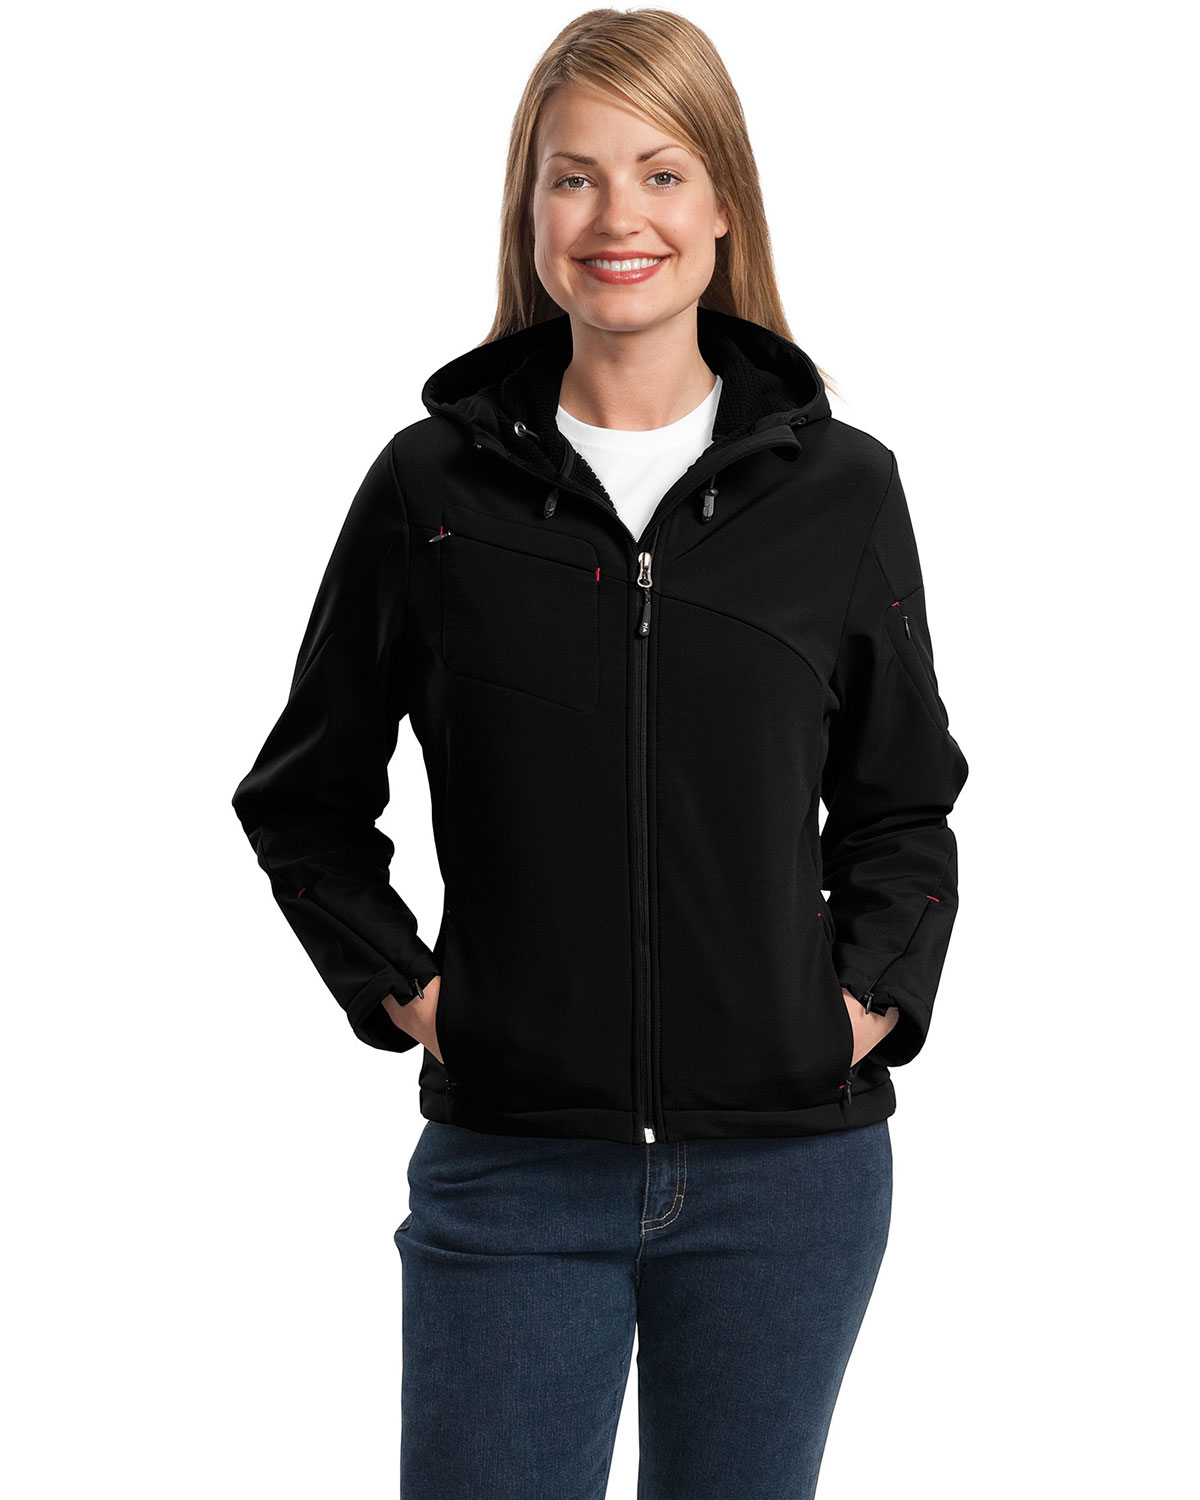 Port Authority L706 Women Textured Hooded Soft Shell Jacket at Apparelstation